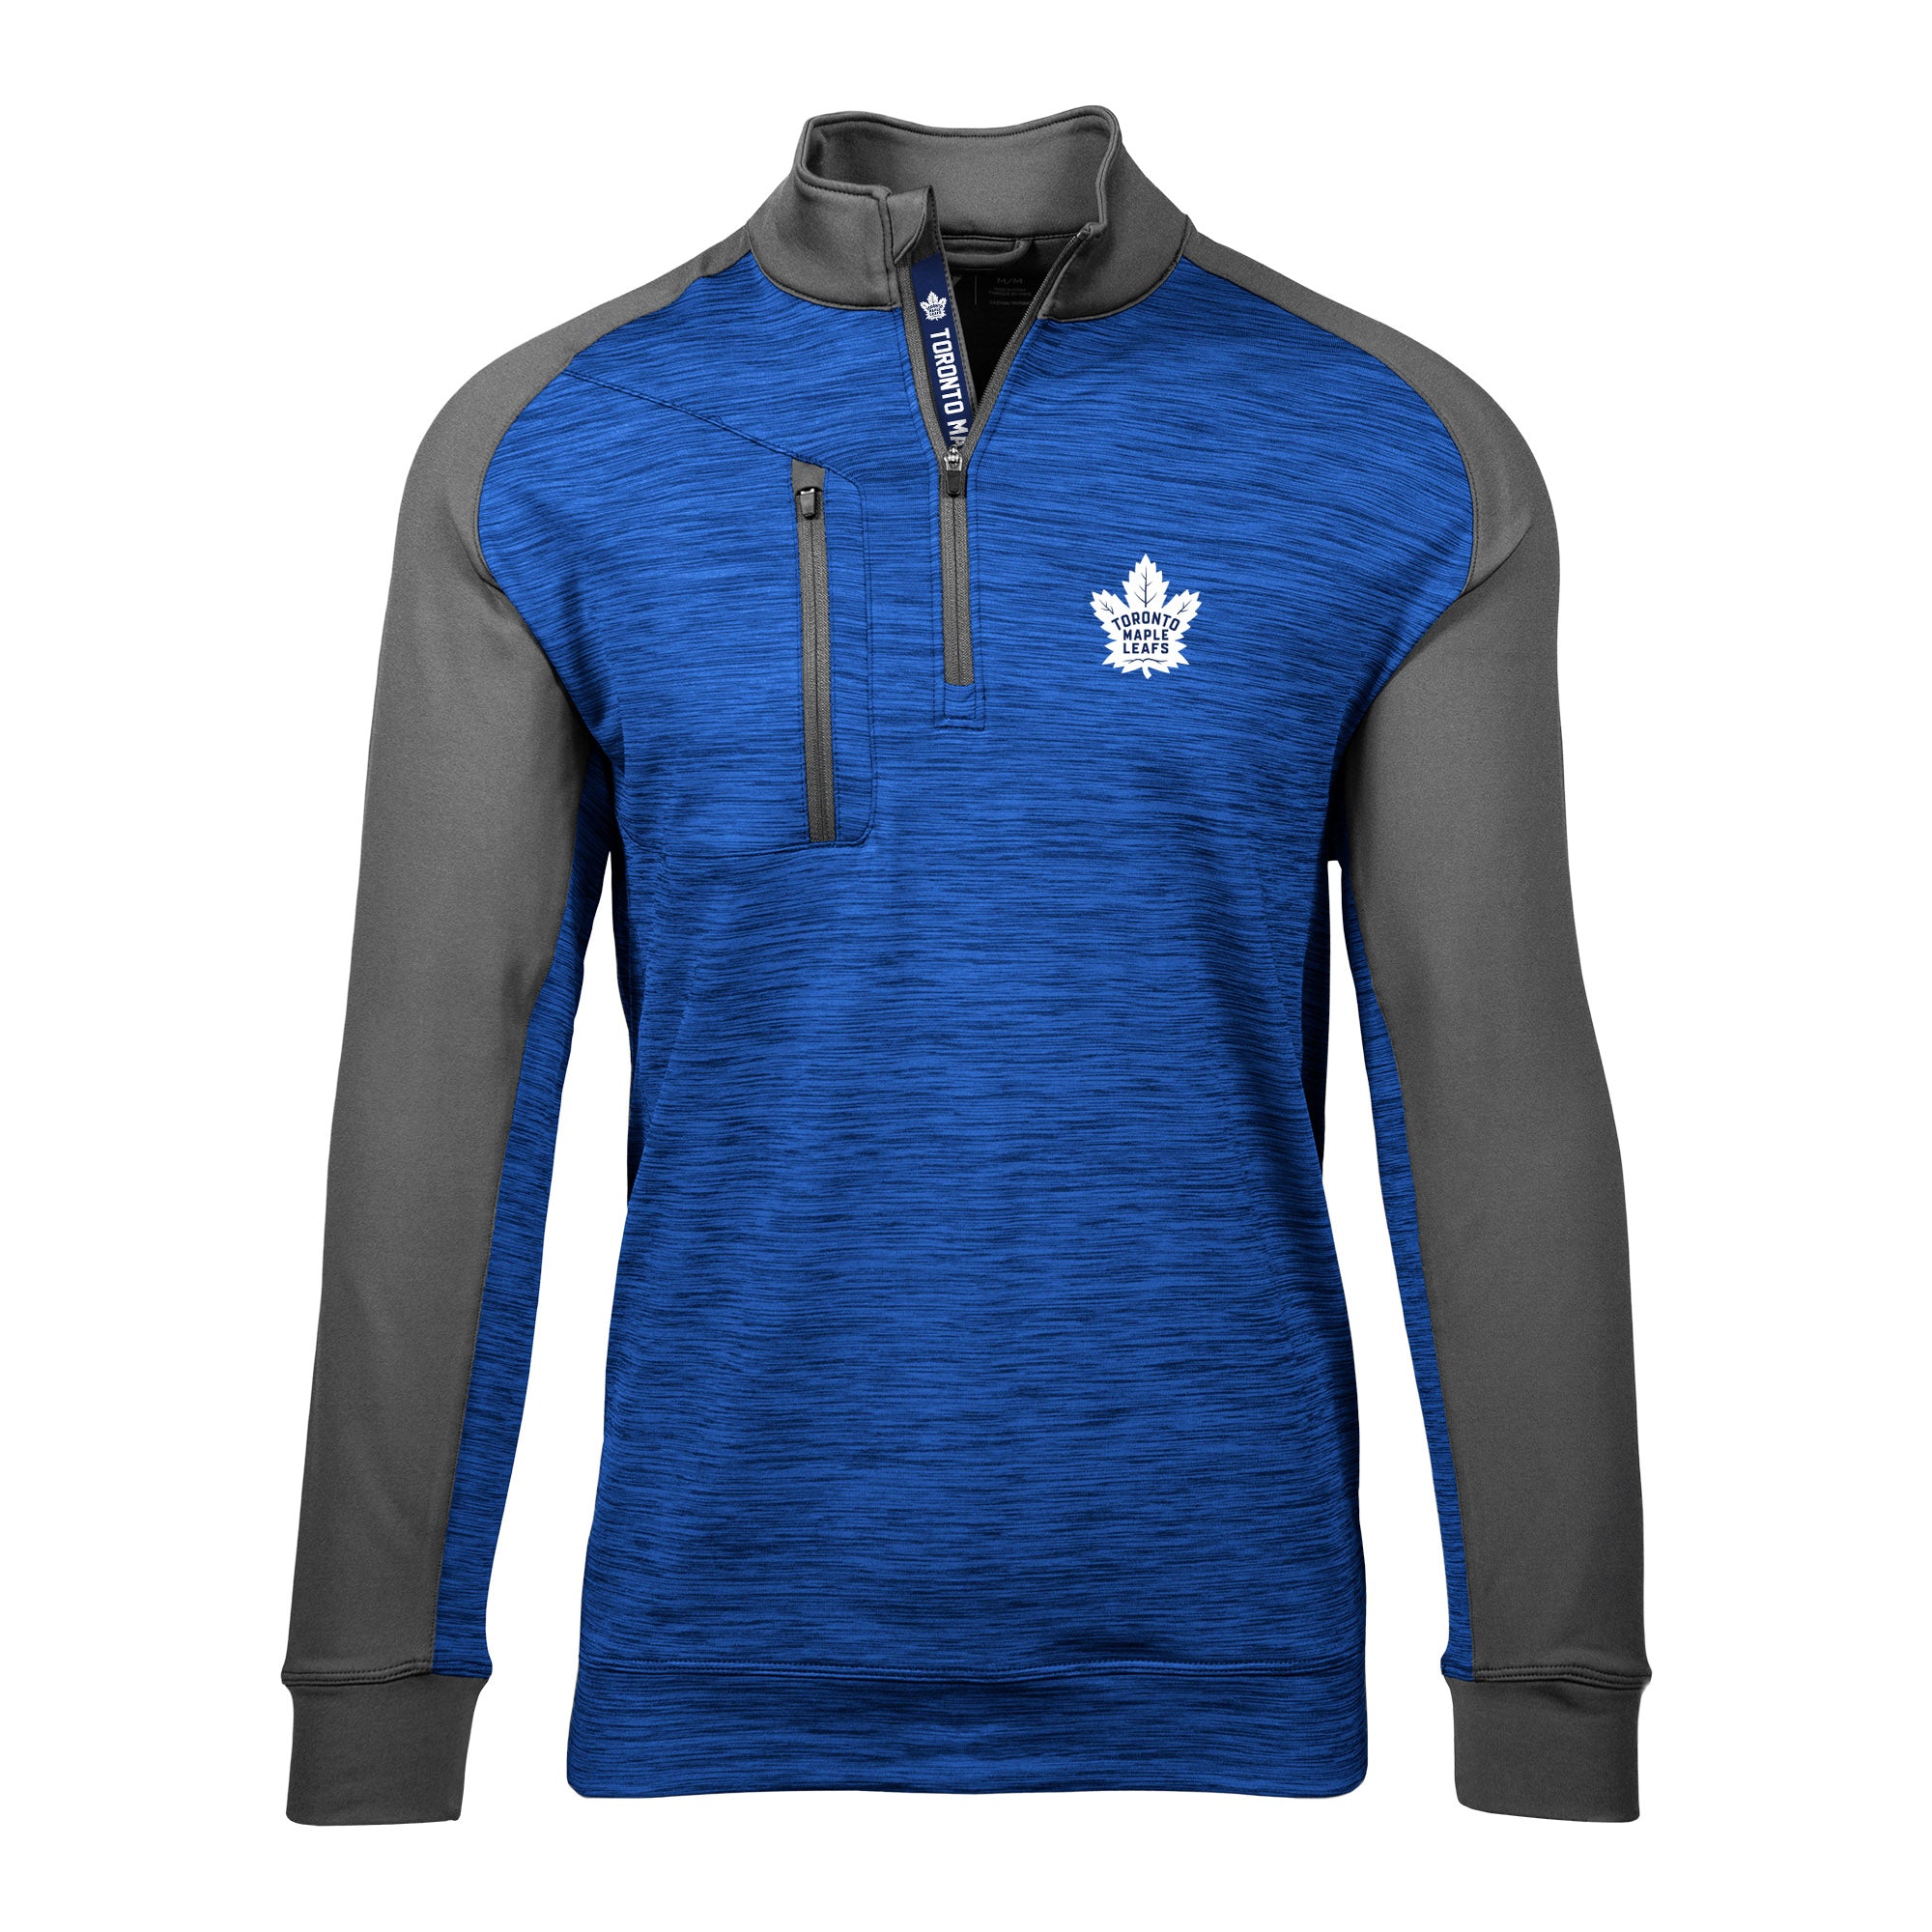 Mens Toronto Maple Leafs Sweater, Maple Leafs Cardigans, Sweaters